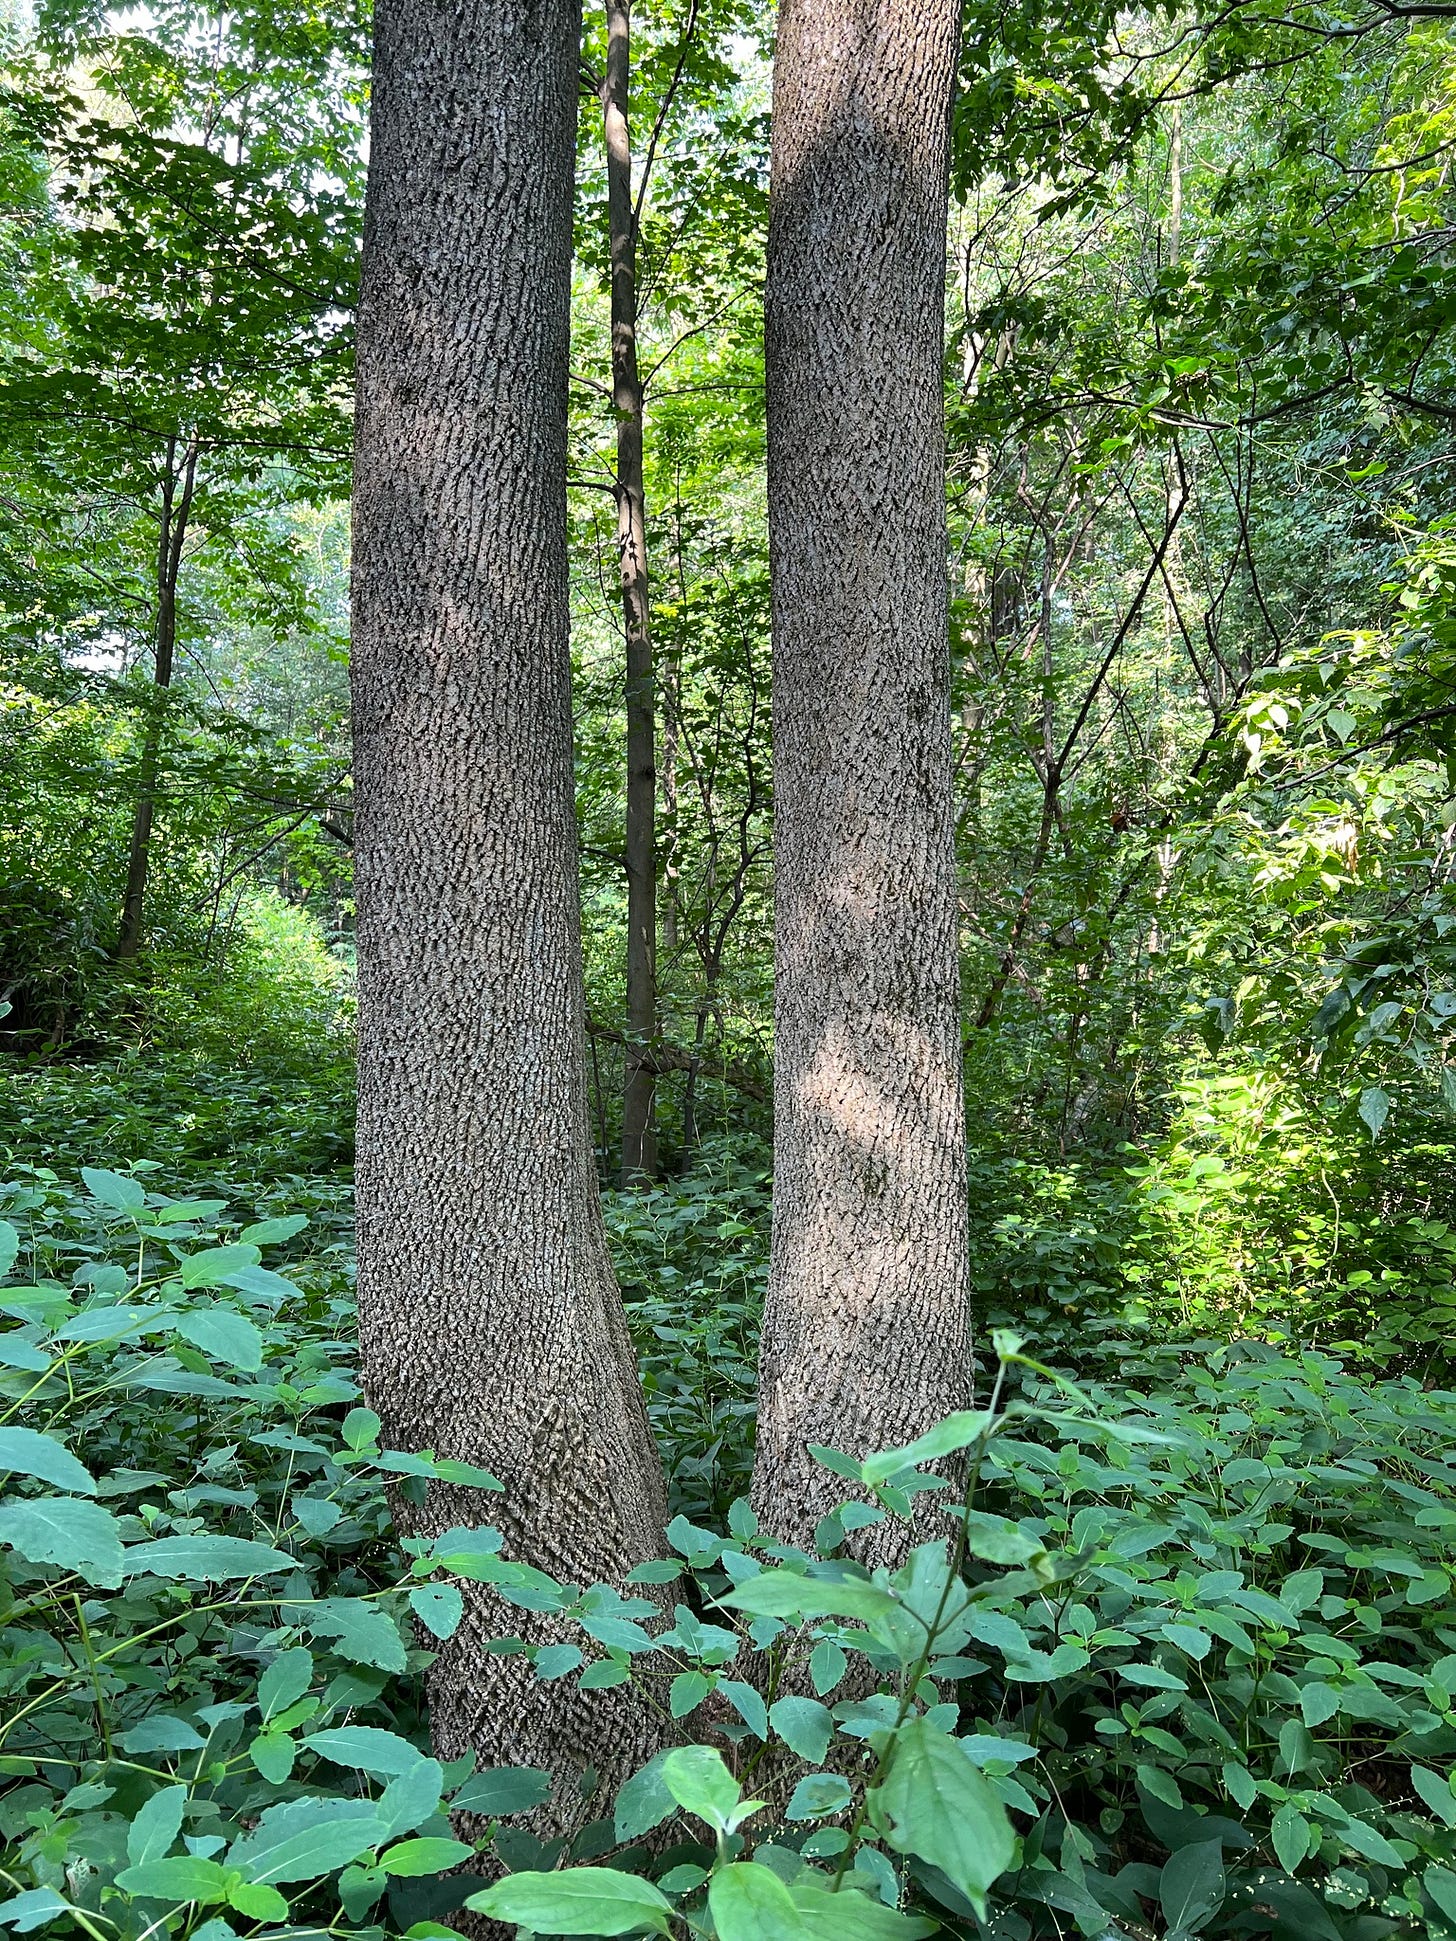 parallel tree trunks with rough furrowed bark in a leafy scene